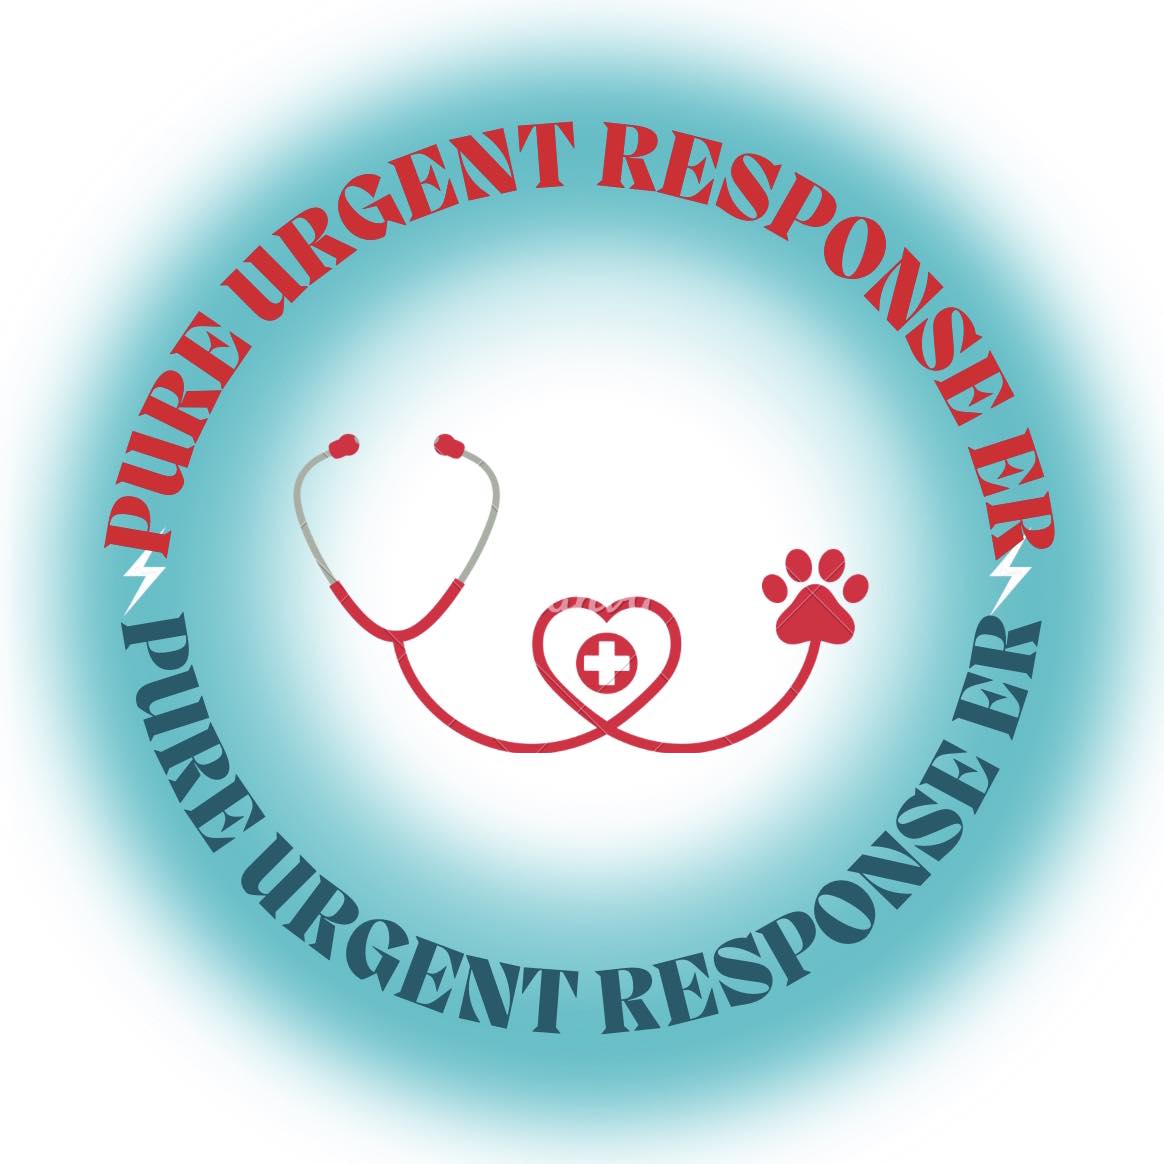 Business logo of Pet Urgent Response and Emergency